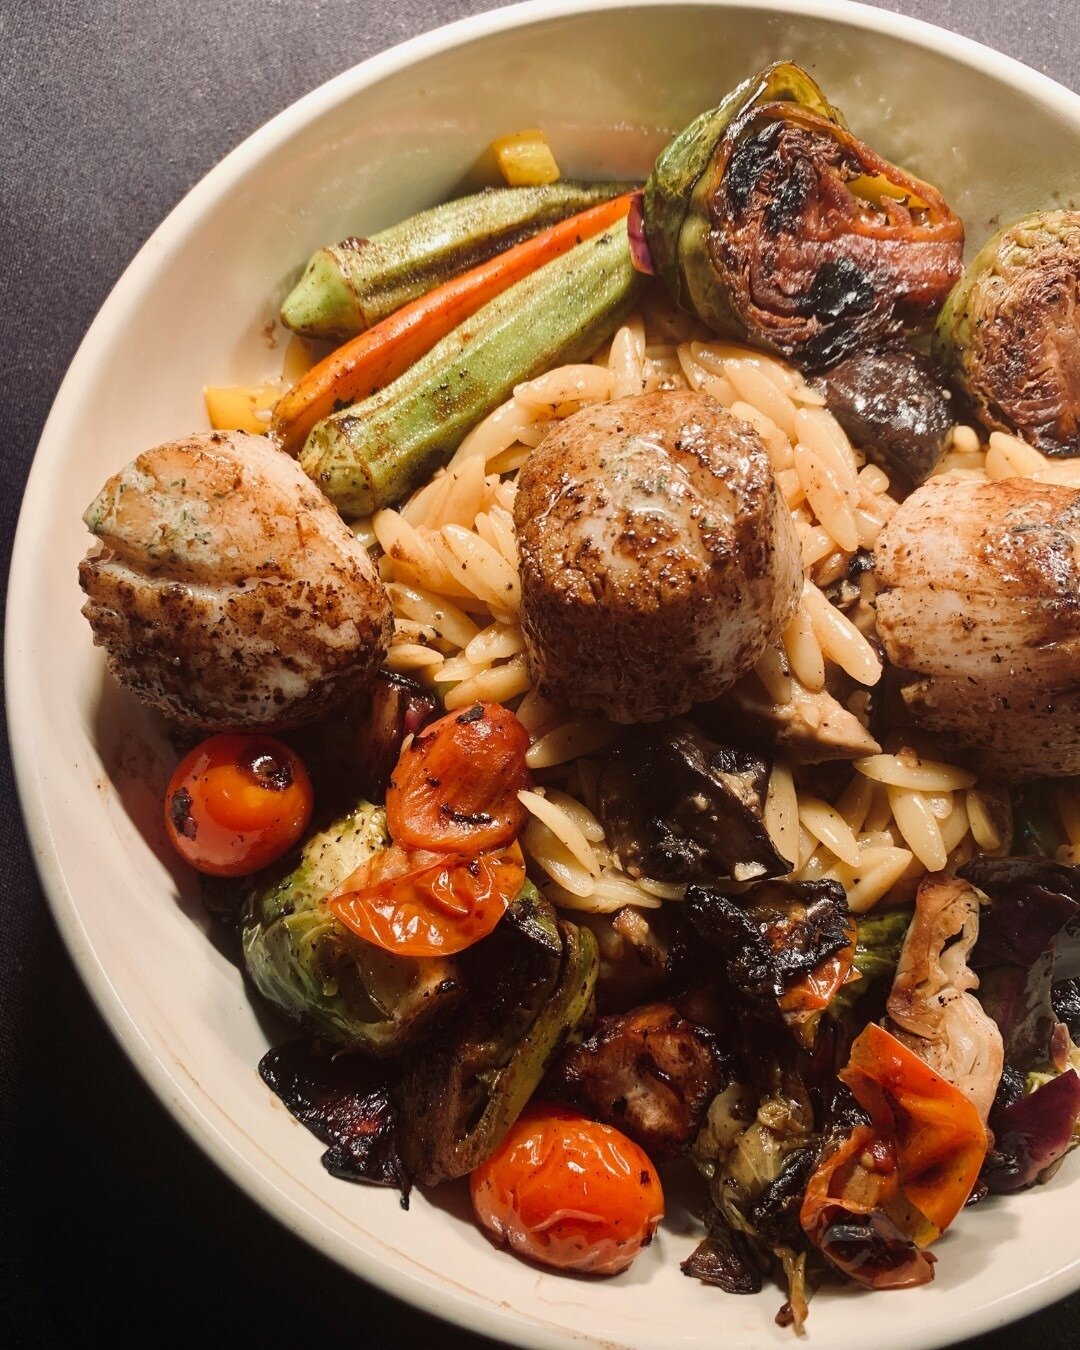 Snuggle up to a bowl of this Mushroom Orzo with Roasted Veggies and Jumbo Scallops or Jumbo Gulf Shrimp this week at Elliot's Table. We've got beautiful fall weather &amp; our patio seating is ready for you! 🍂✨🍁

Join us from 3-9PM, Wednesday-Satur